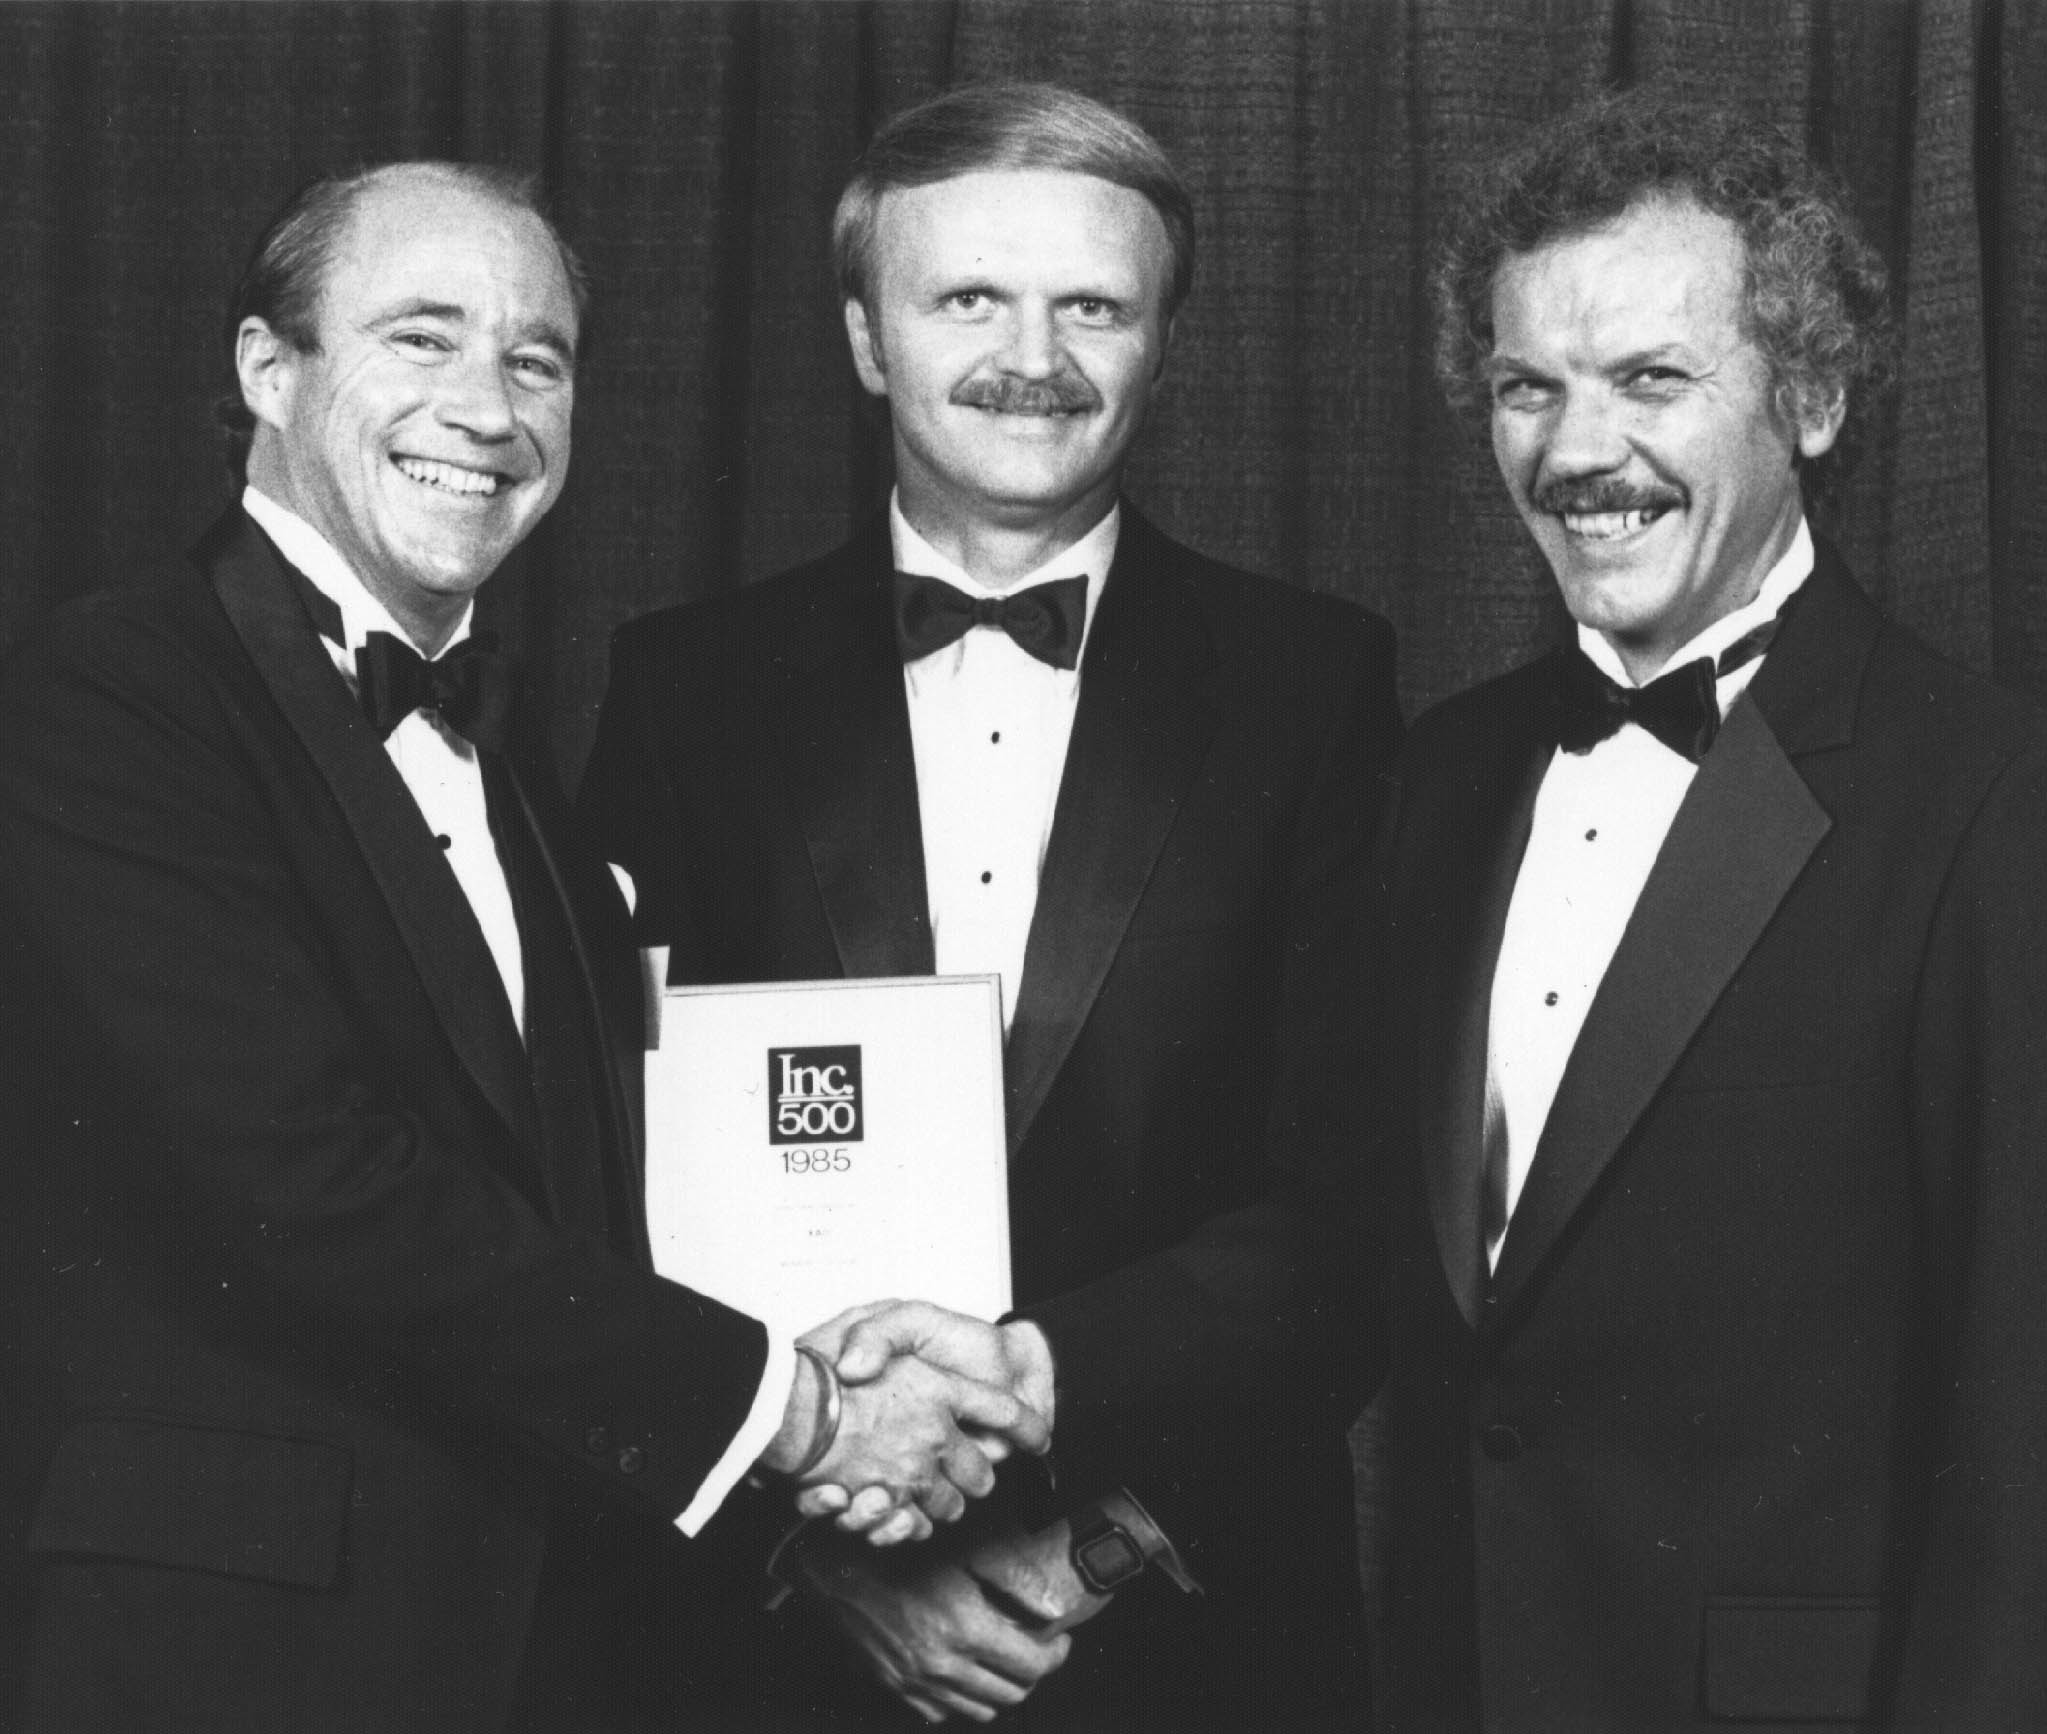 Bob and Heinz accepting the INC 500 award, 1986